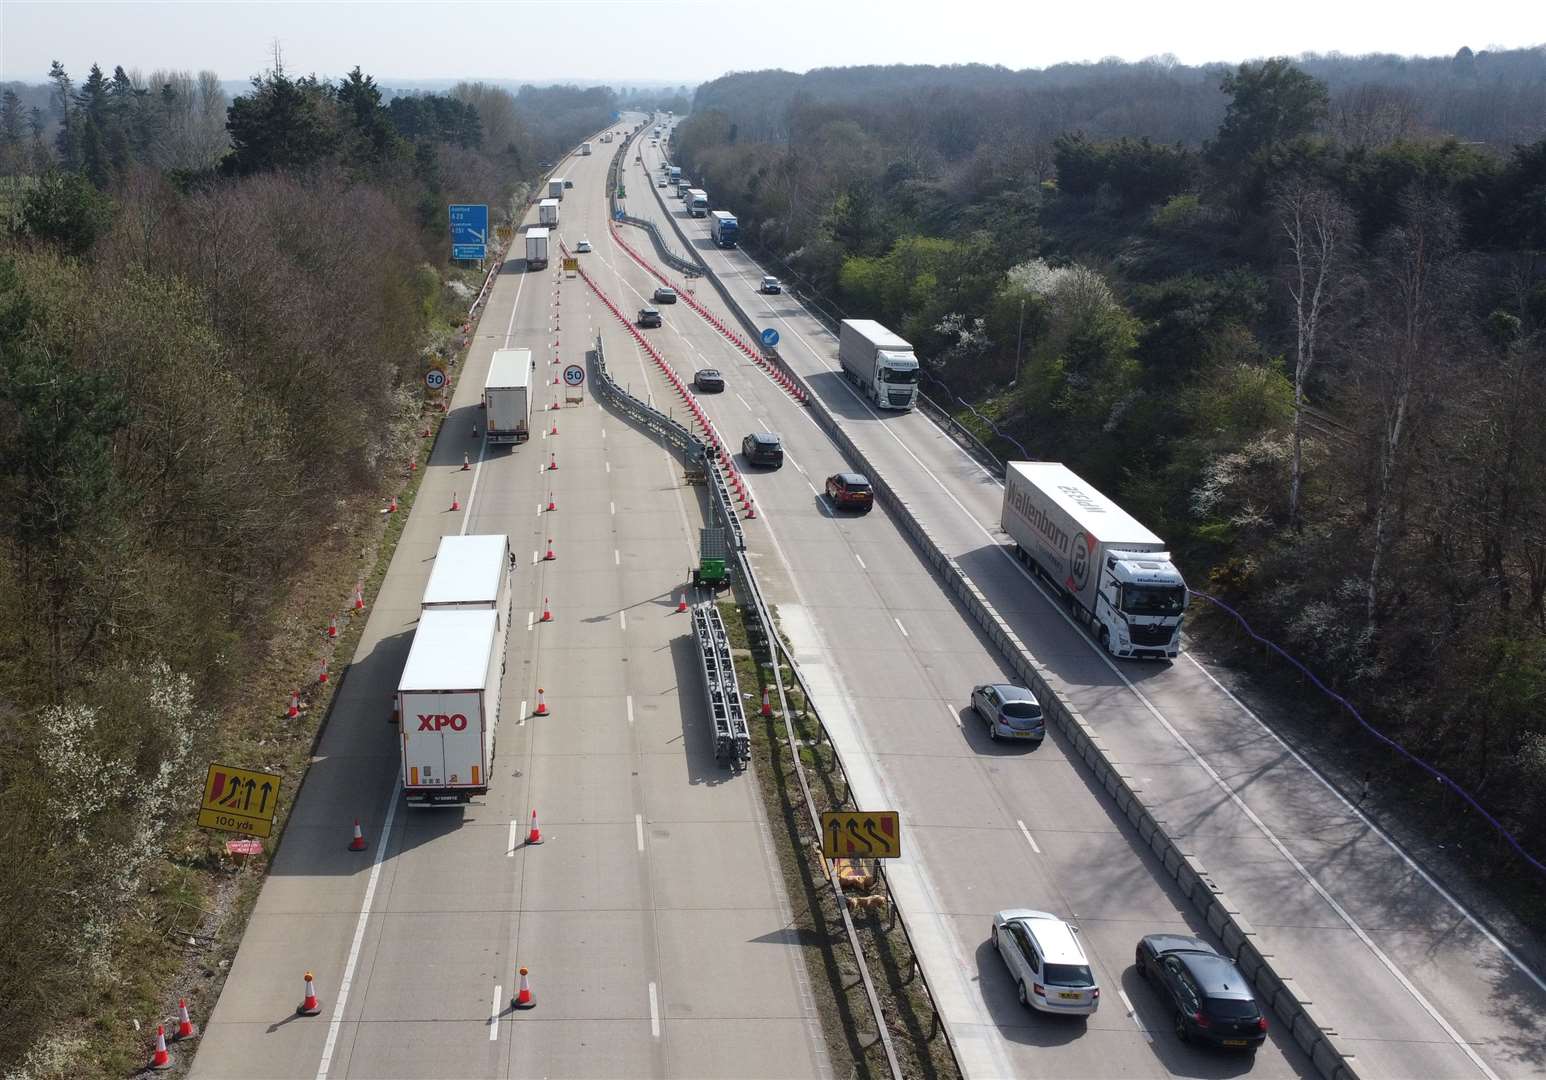 Operation Brock was deployed on the M20 last month